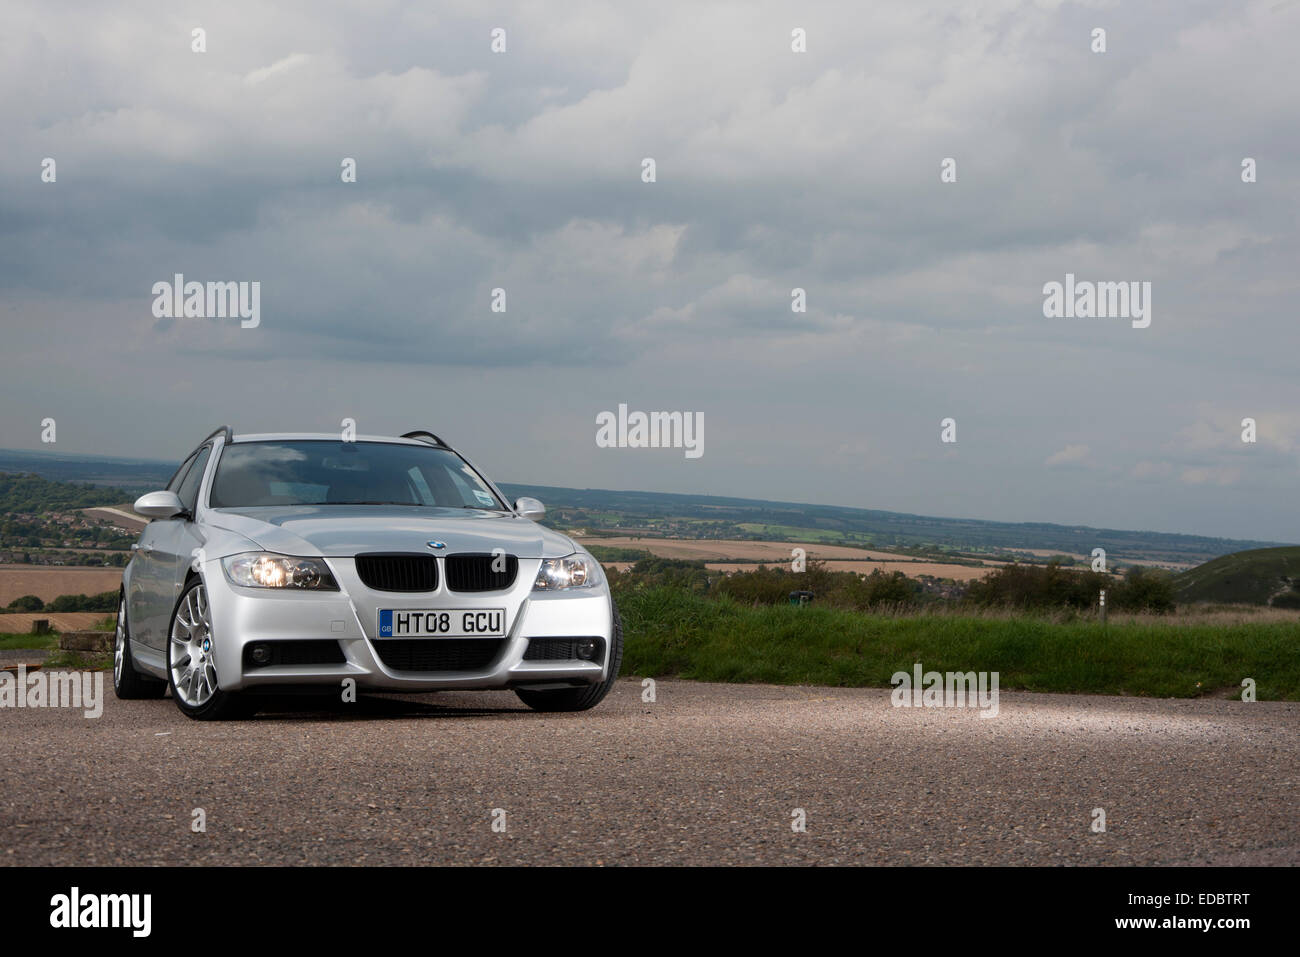 Bmw 3 Series Touring High Resolution Stock Photography and Images - Alamy